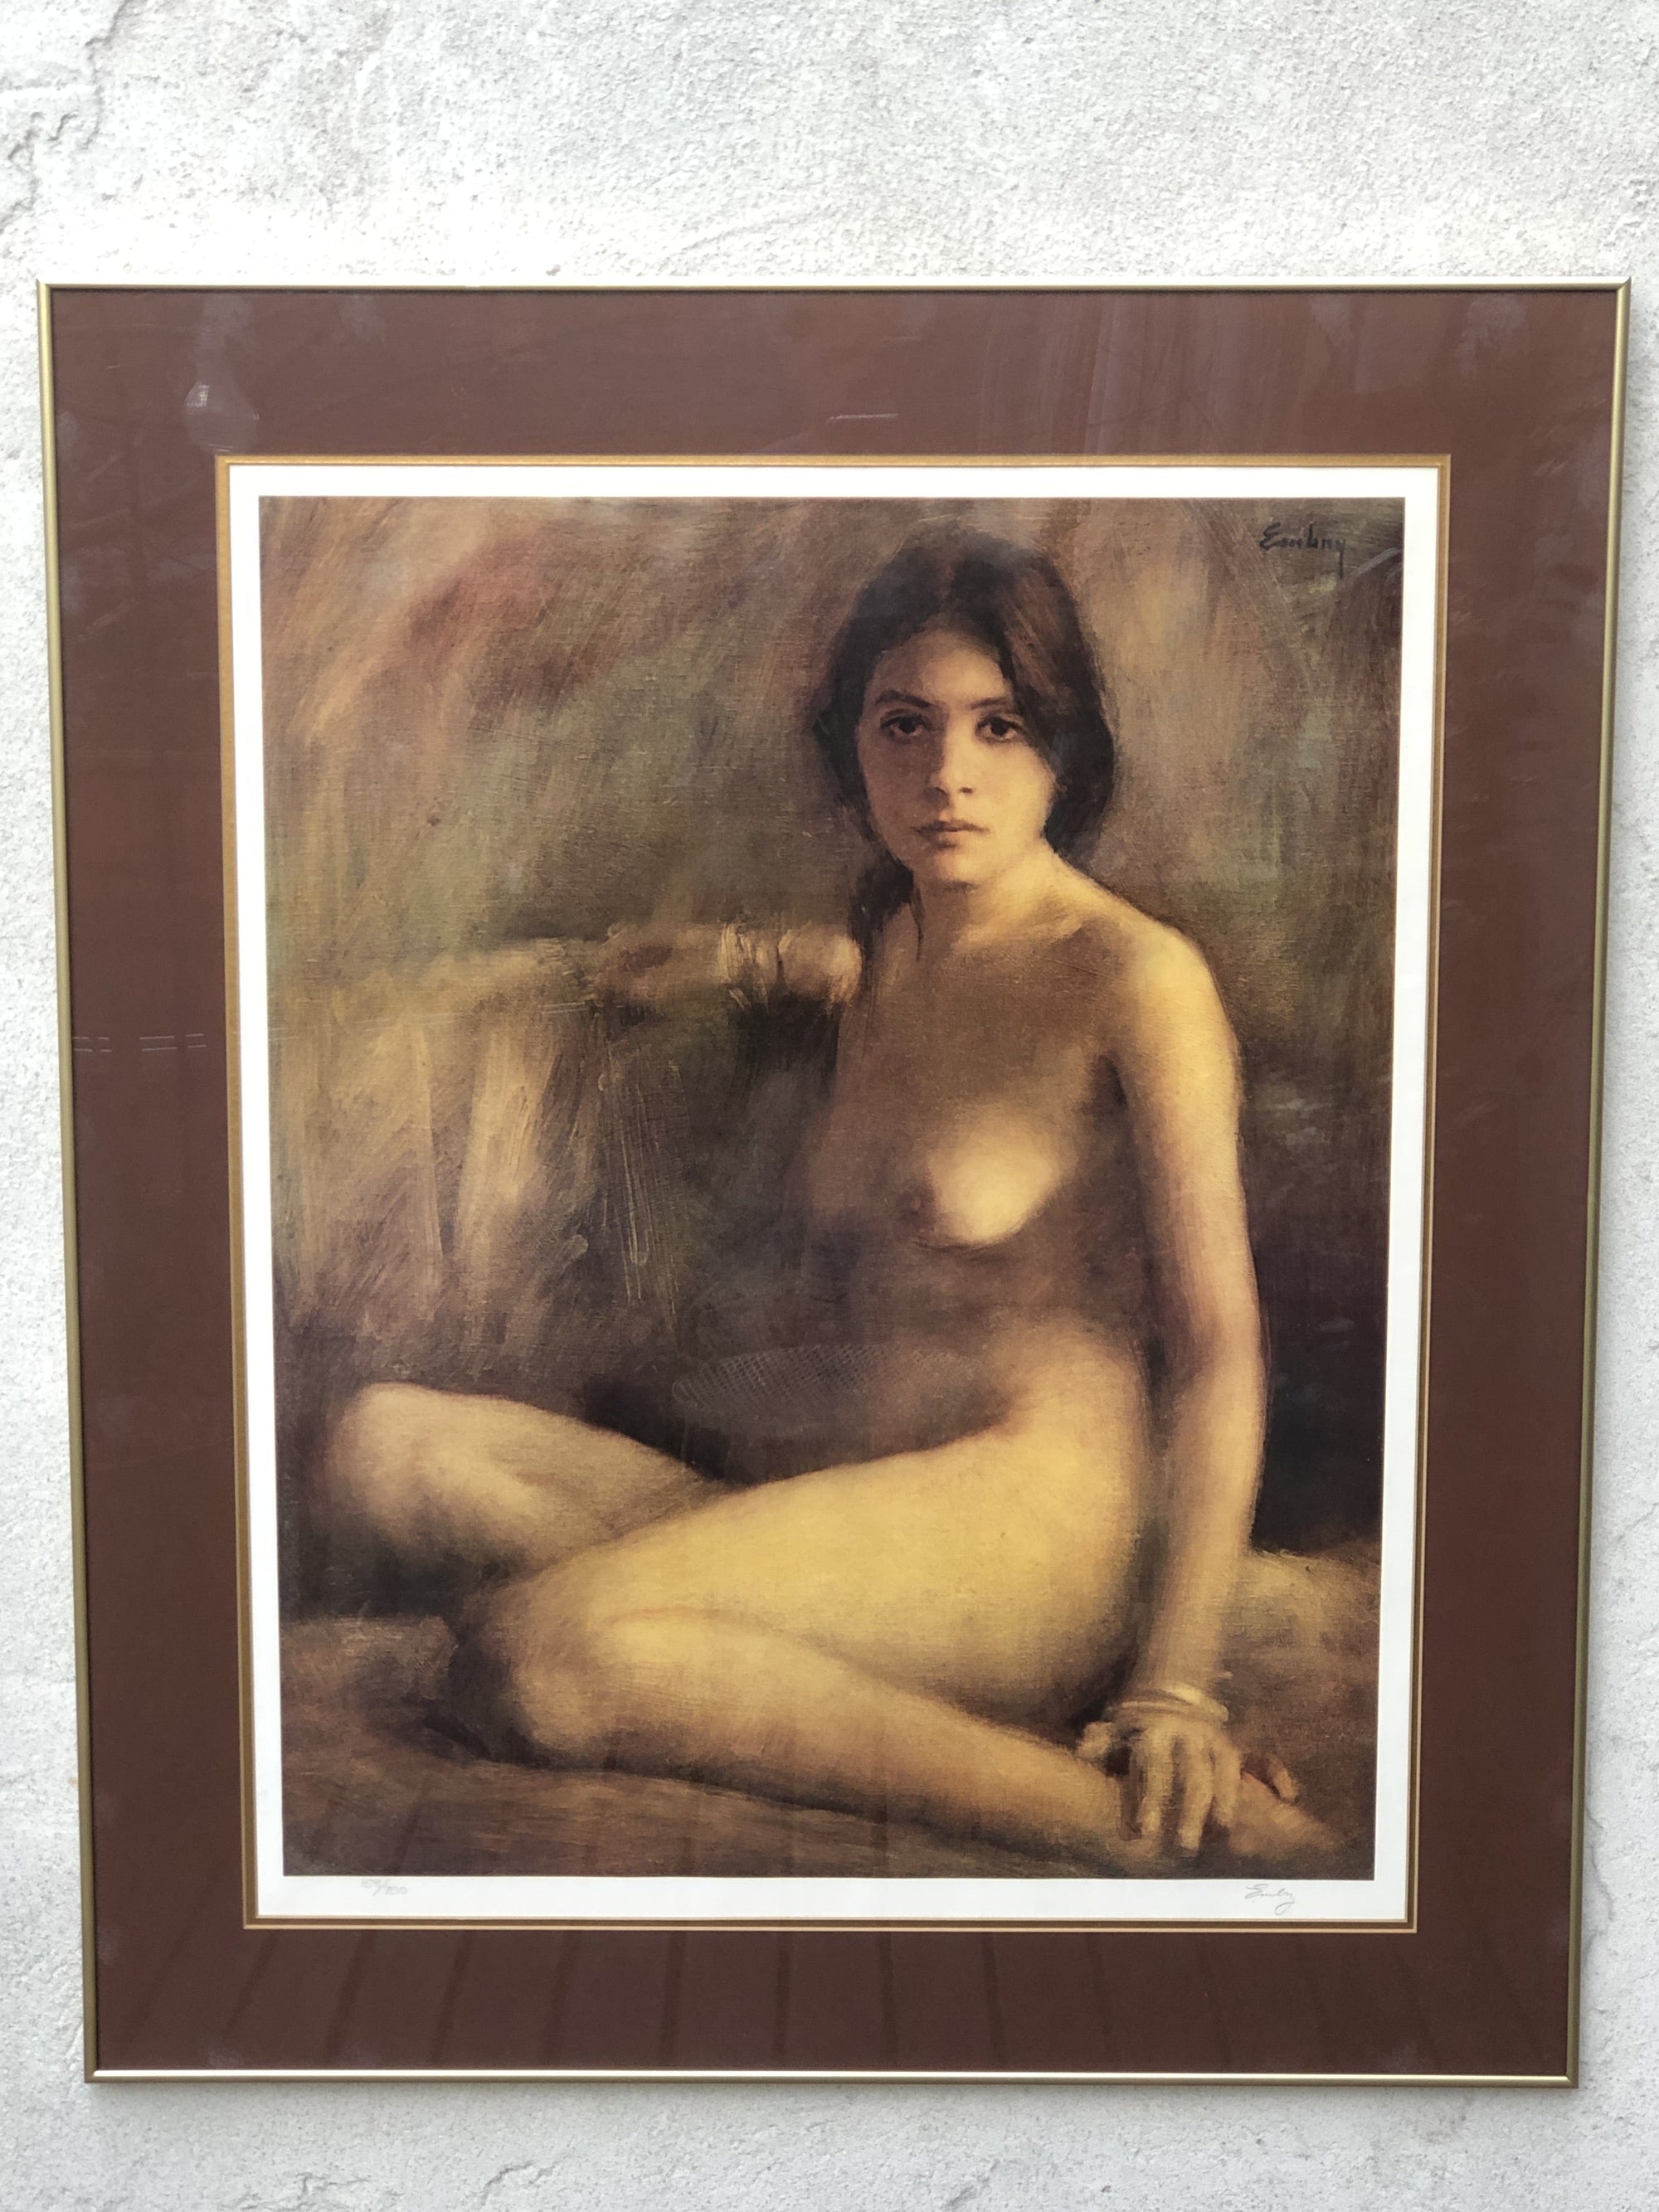 I Like Mikes Mid Century Modern Artwork Large Evelyn Embry Nude Signed Framed Print, 1970s